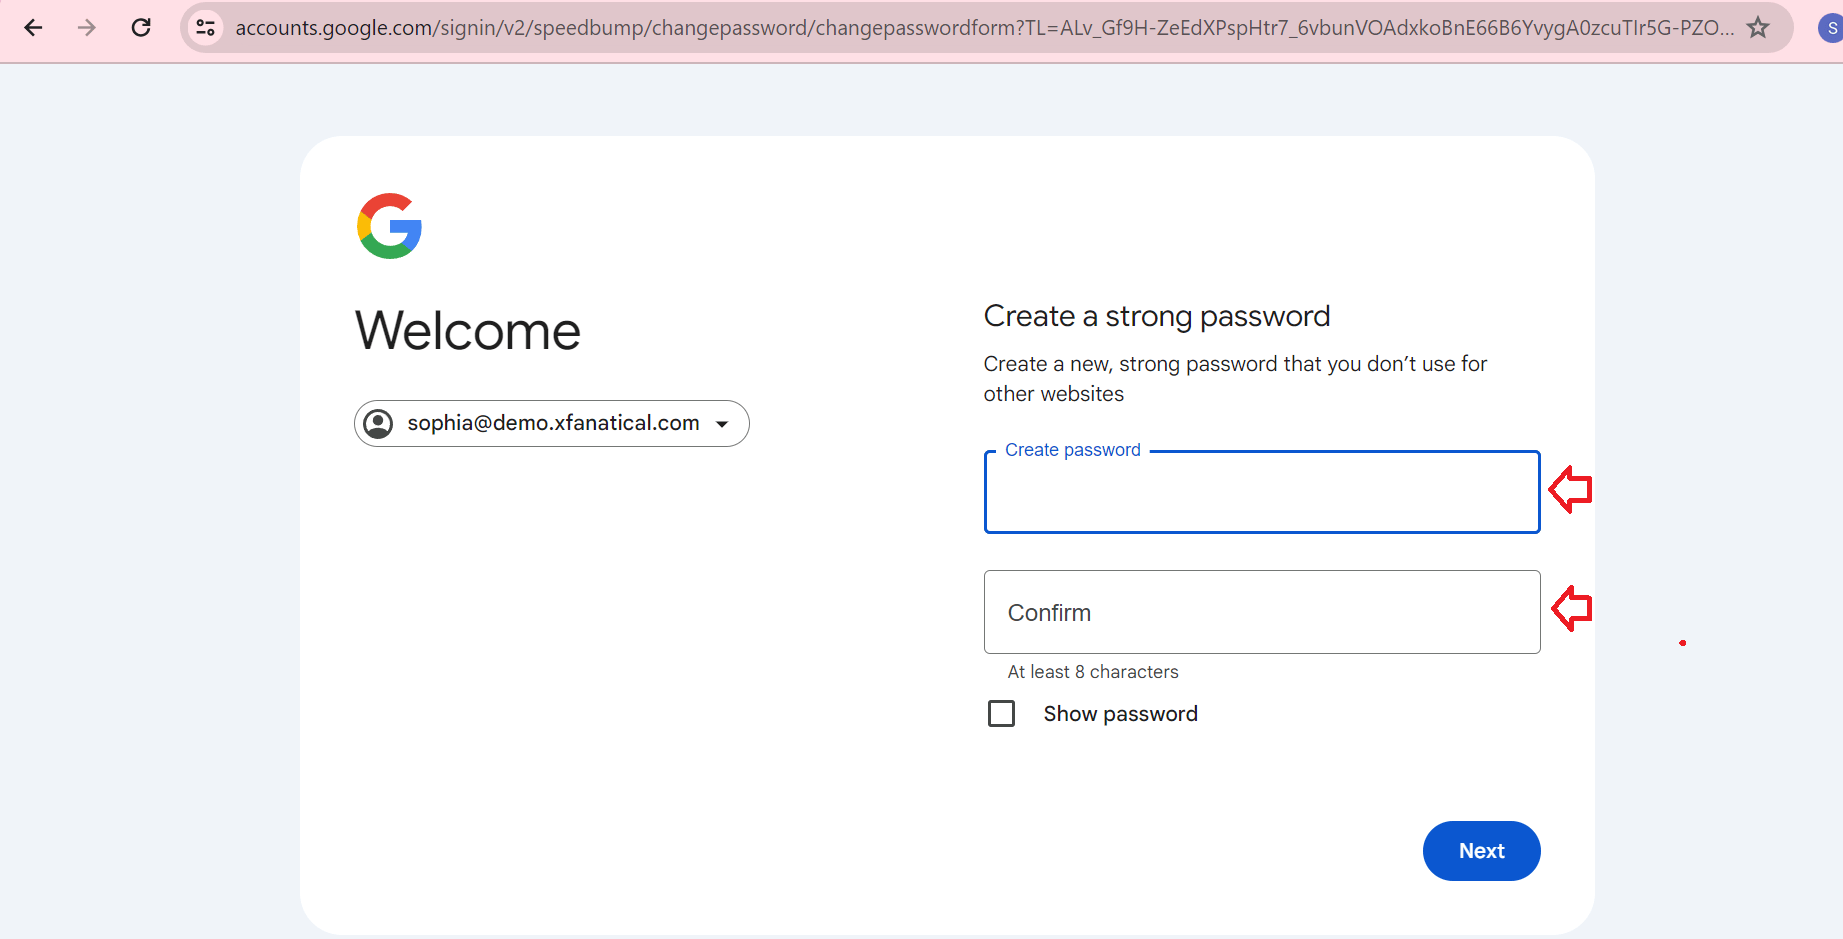 You will observe that the user is prompted to reset the password after logging in